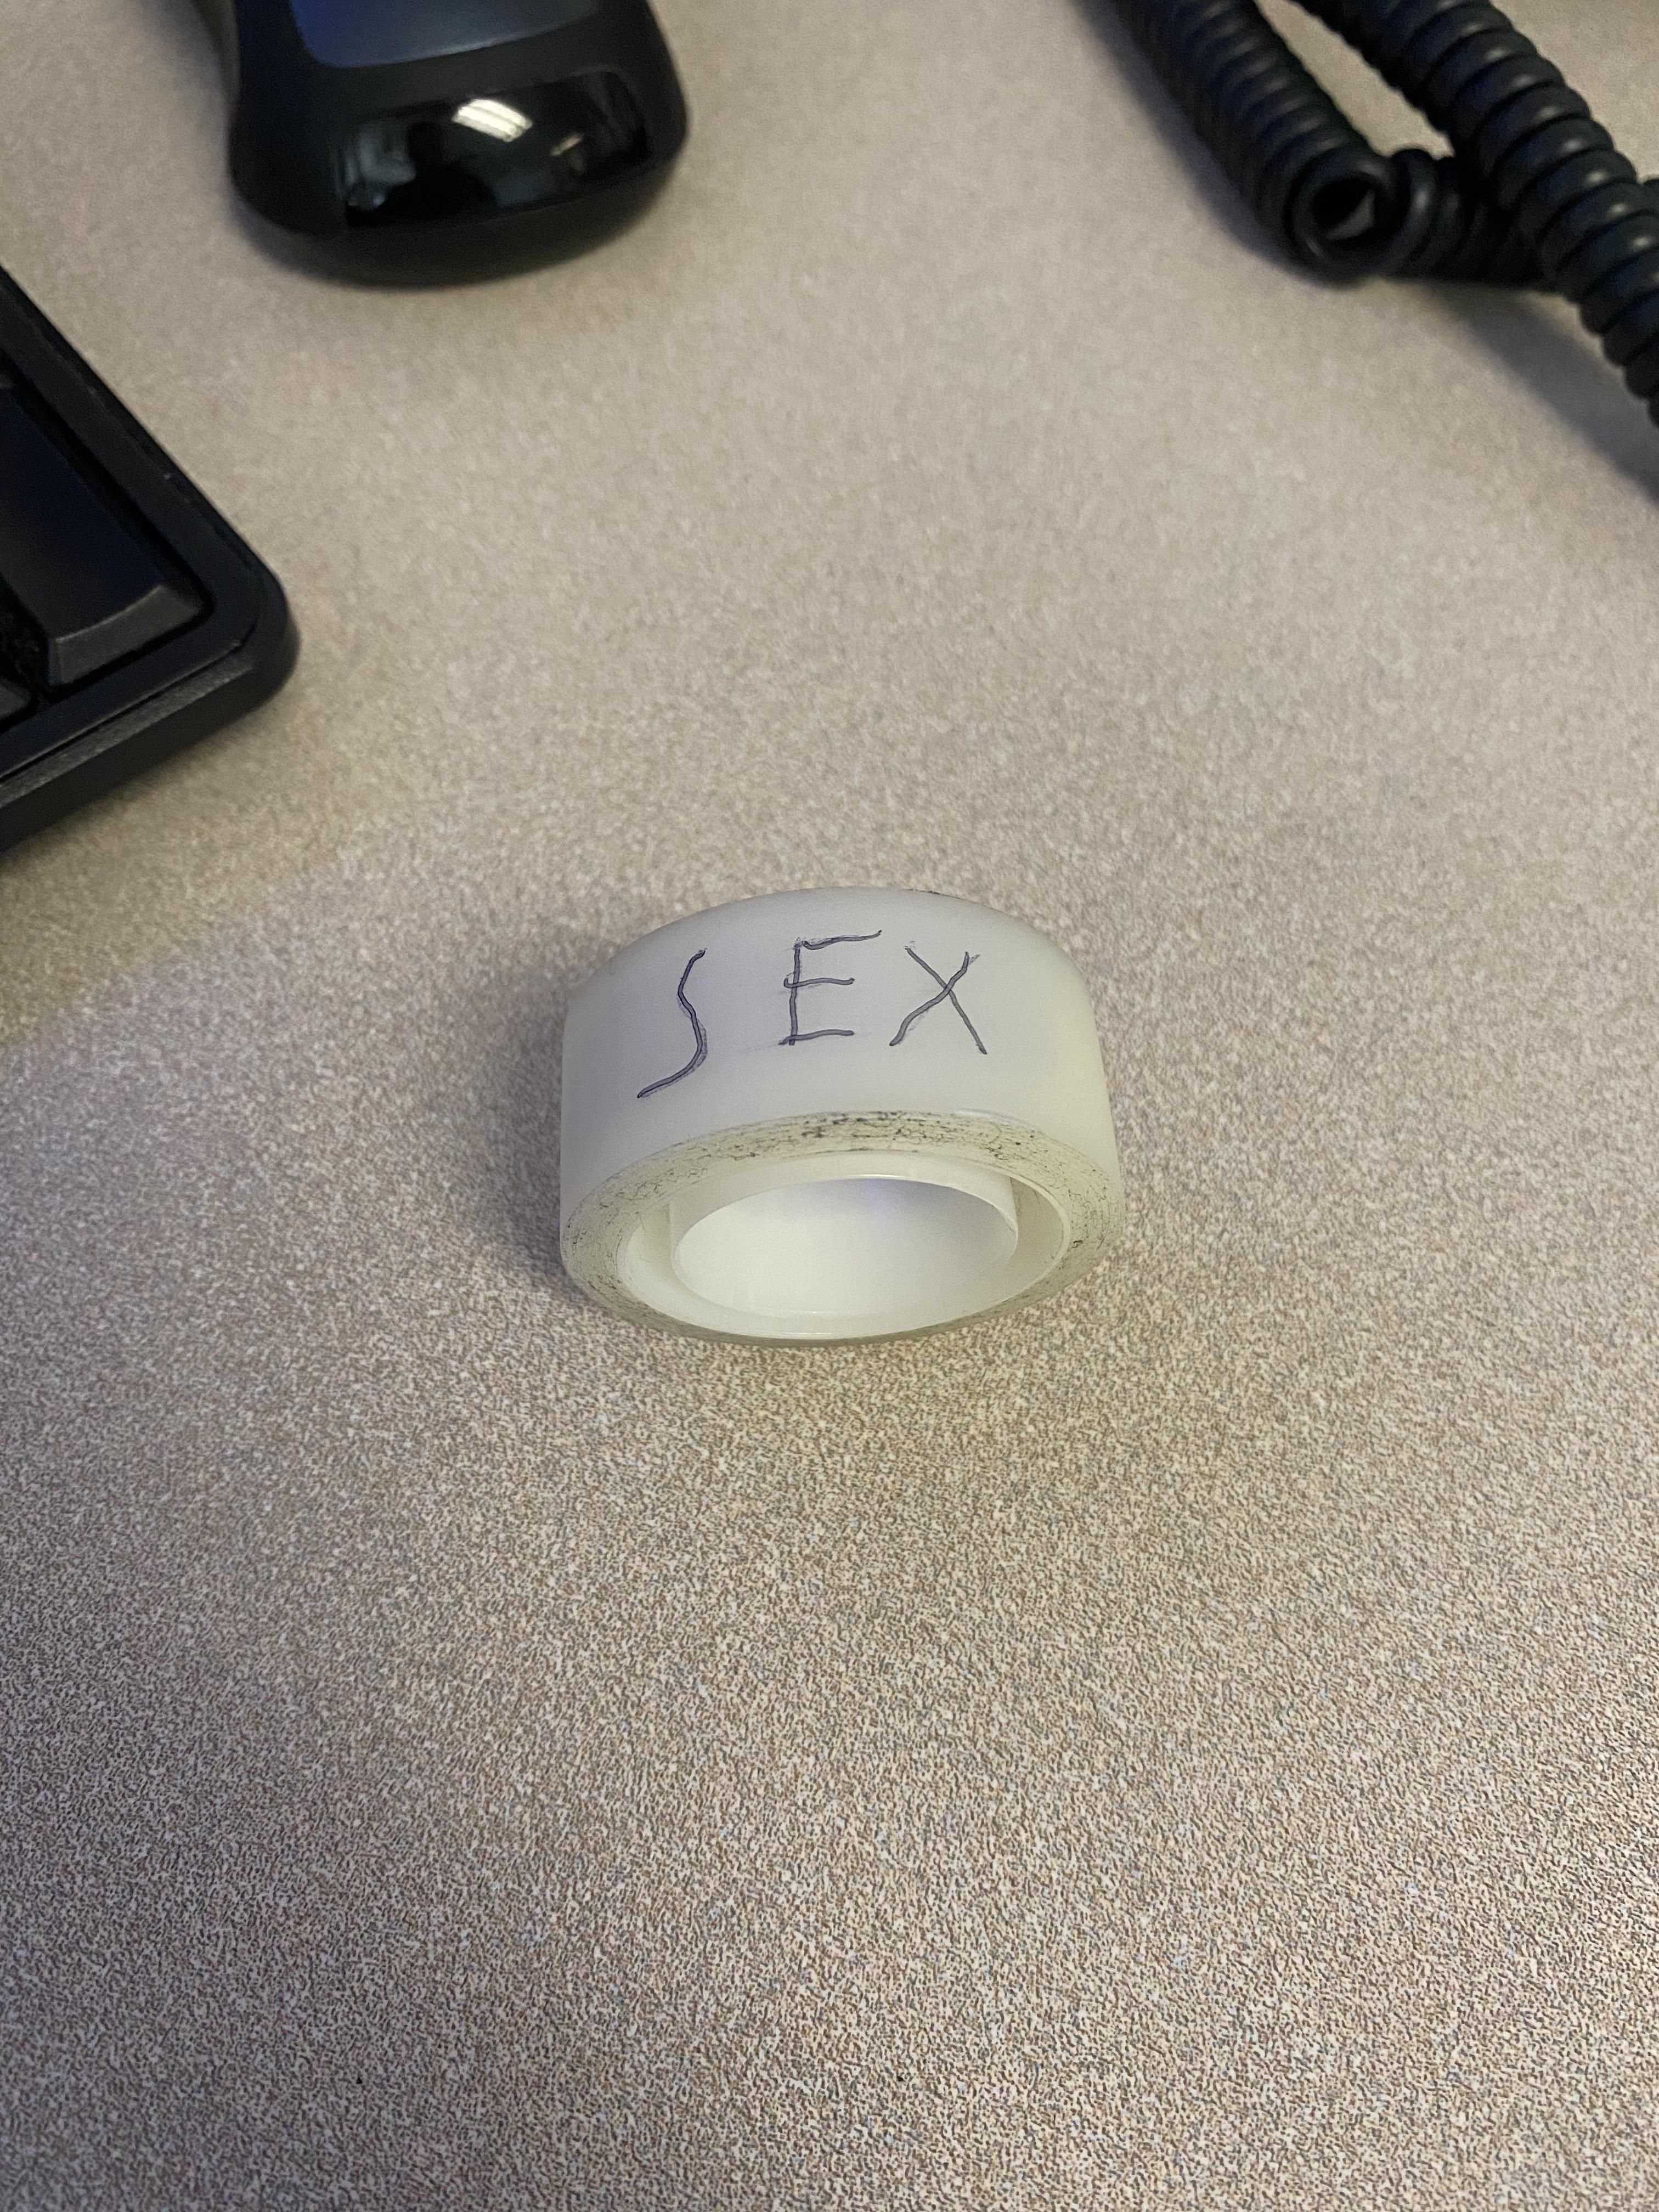 I made a sex tape at work today.